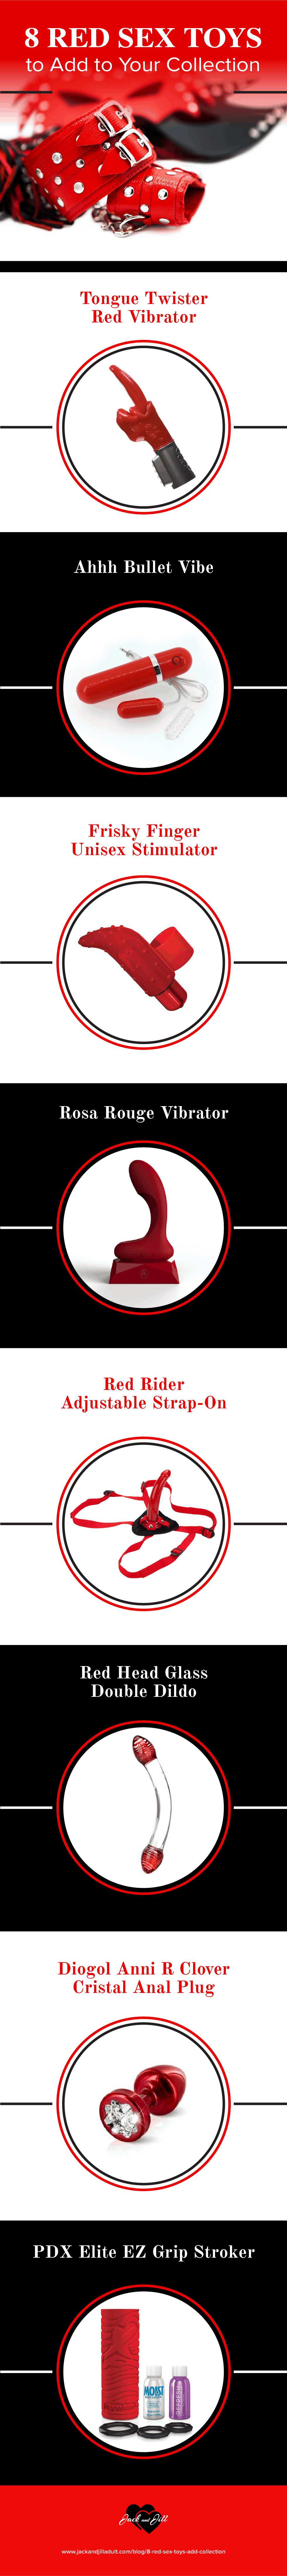 Infographic for 8 Red Sex Toys to Add to Your Collection